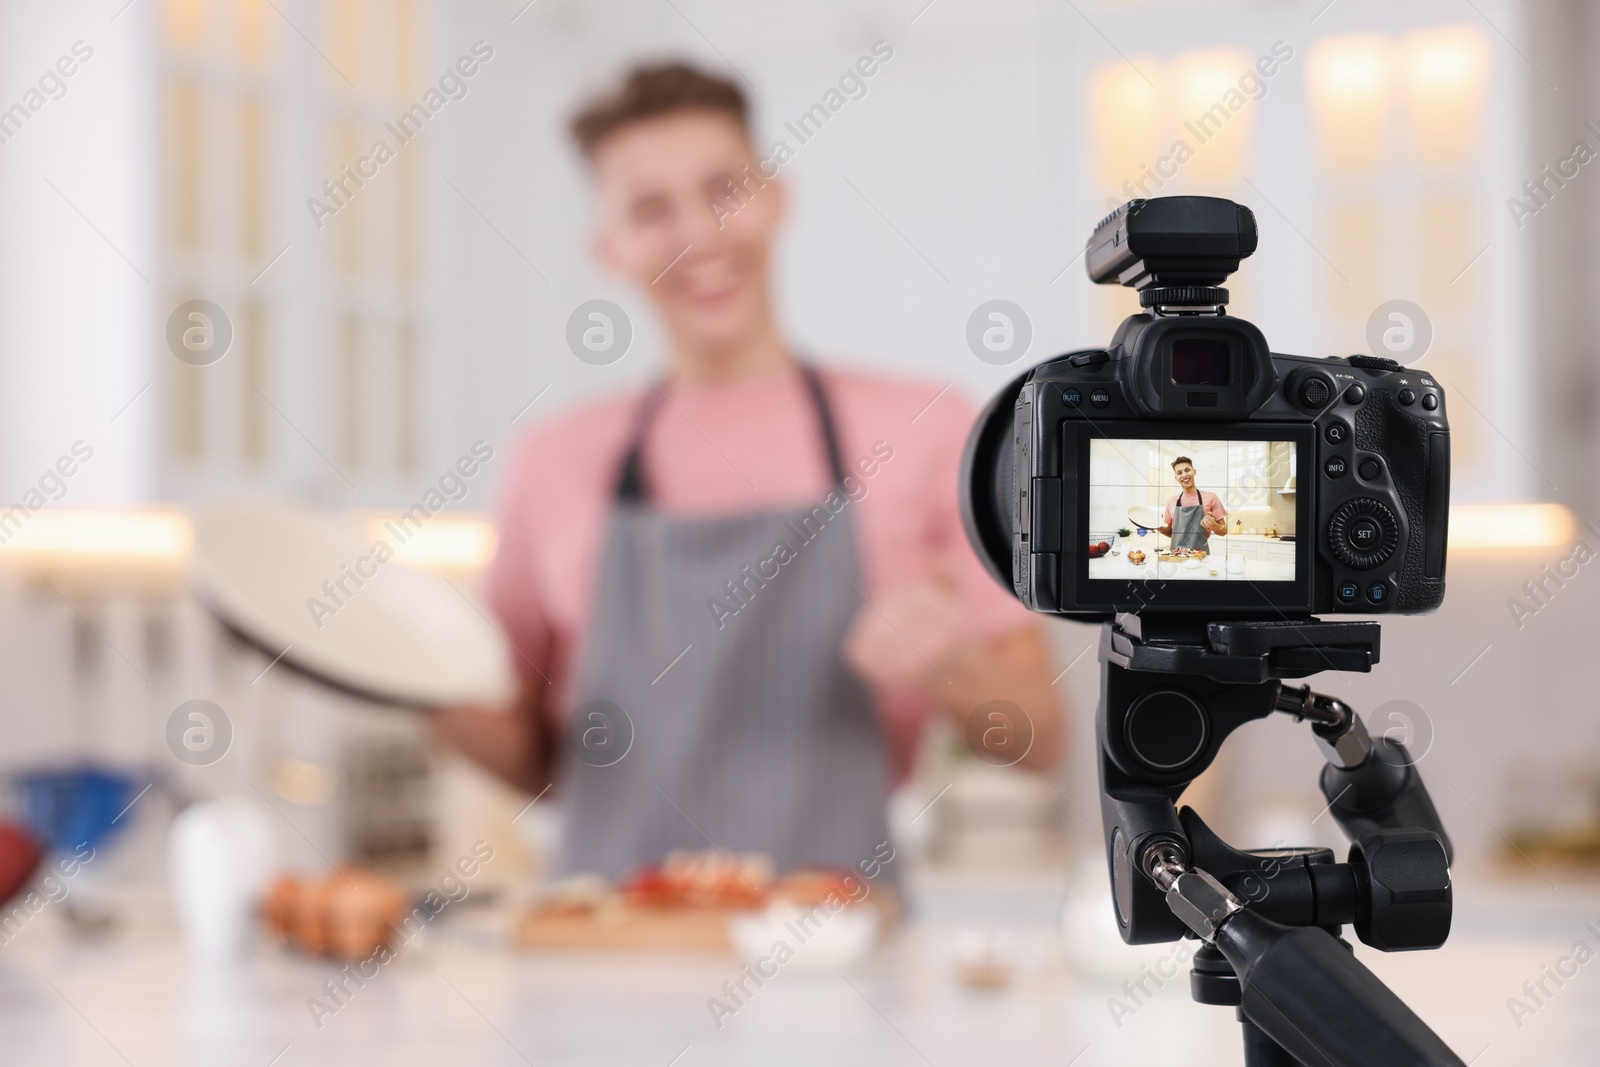 Photo of Food blogger recording video in kitchen, focus on camera